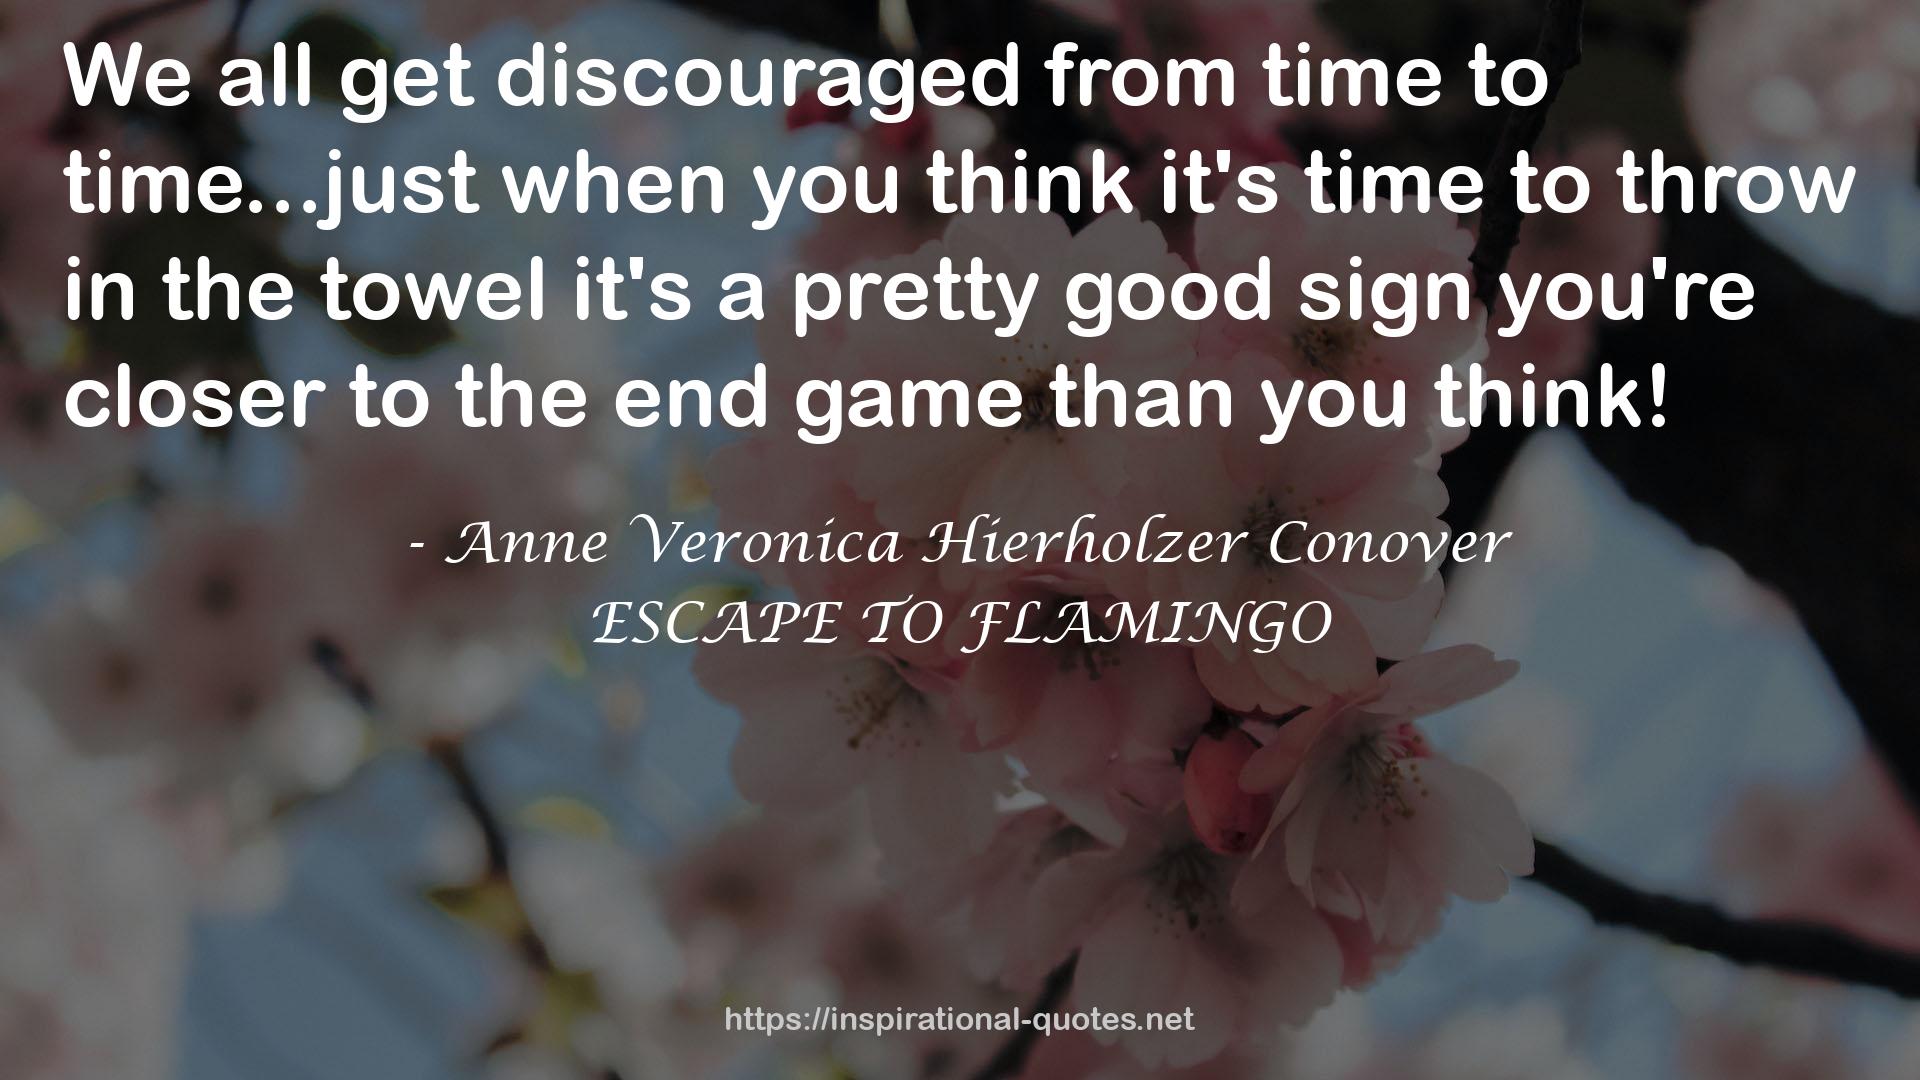 Anne Veronica Hierholzer Conover QUOTES